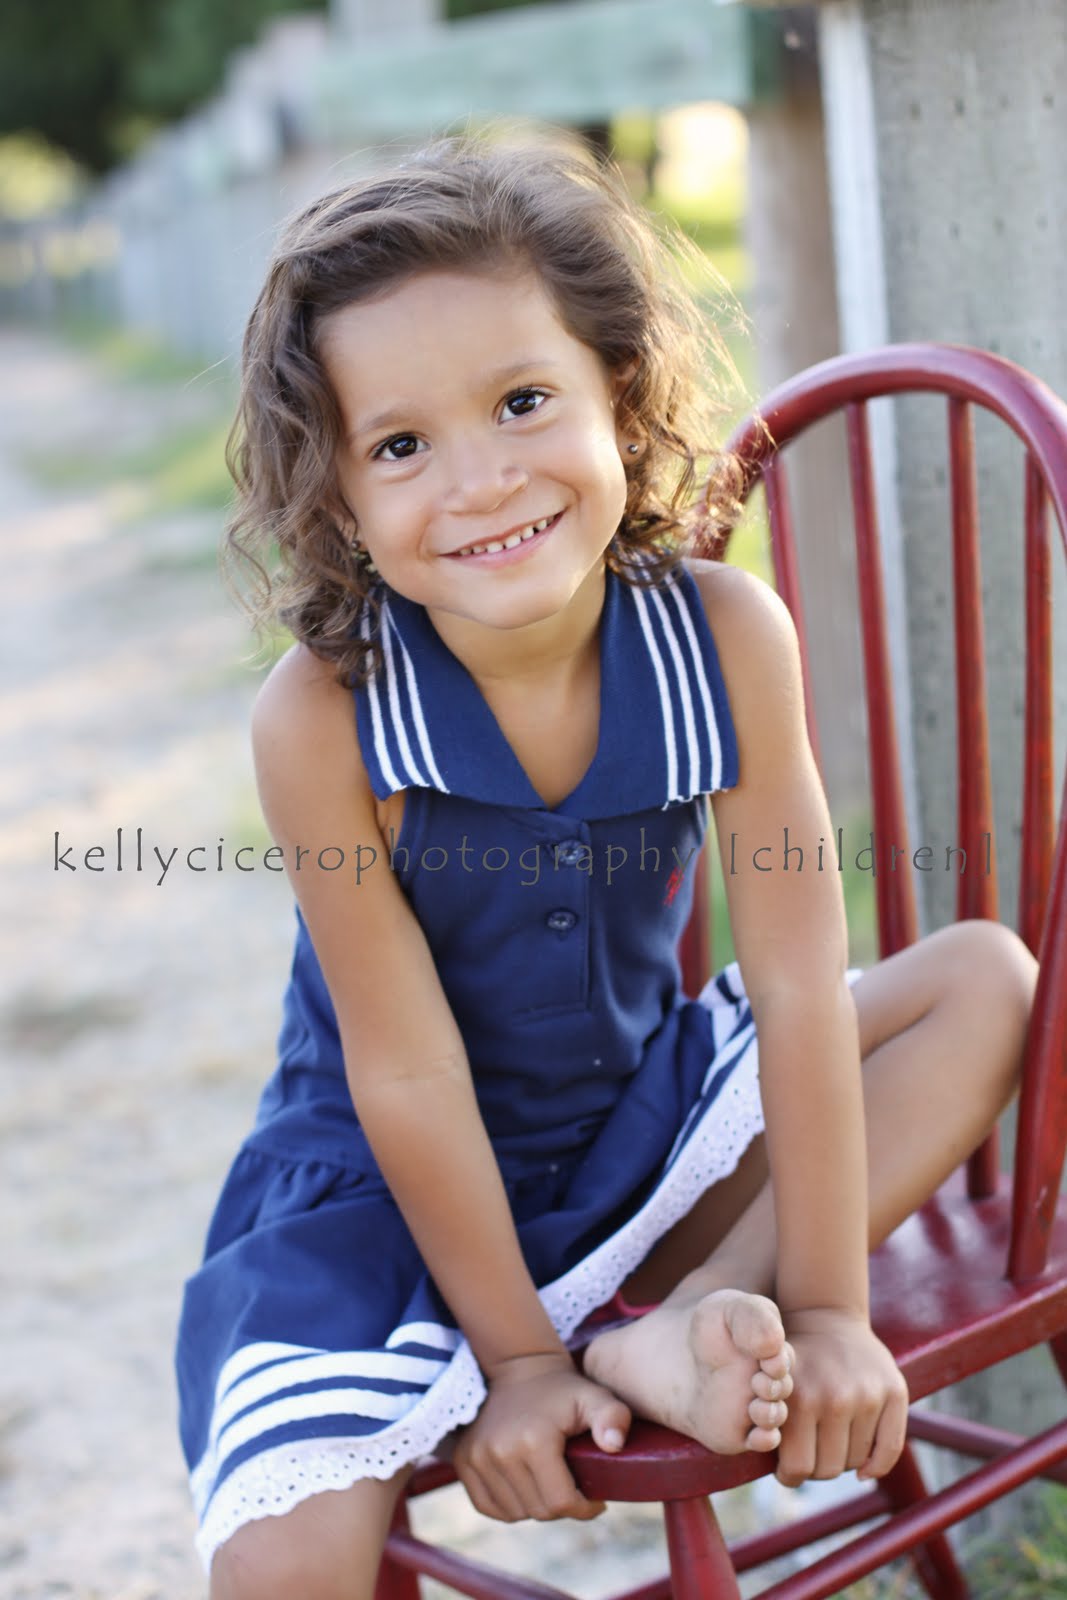 Kelly Cicero Photography: Mini Session with Some Cuties!! |Orange ...